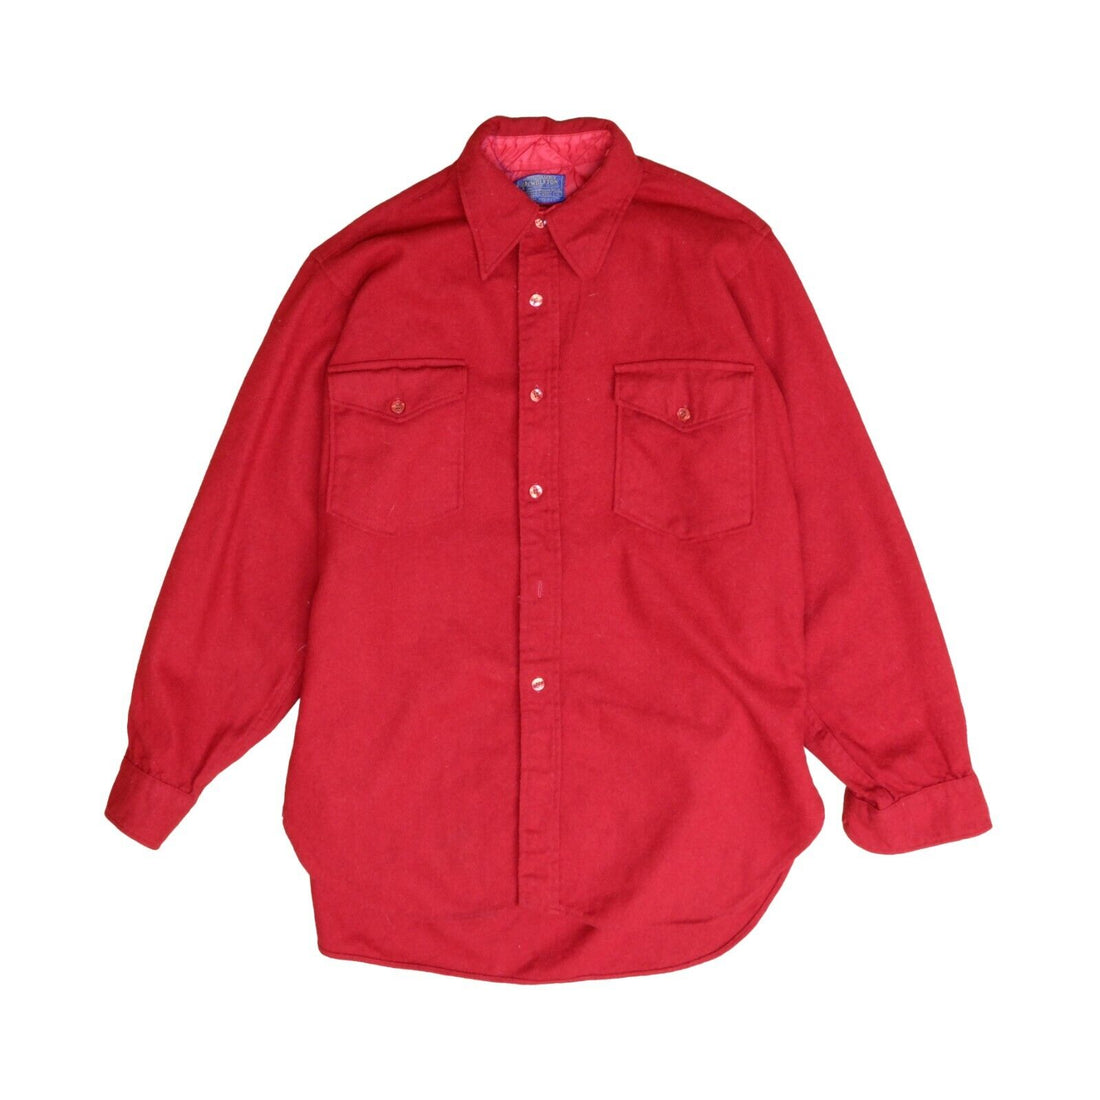 Vintage Pendleton Wool Button Up Field Shirt Size 16 Red